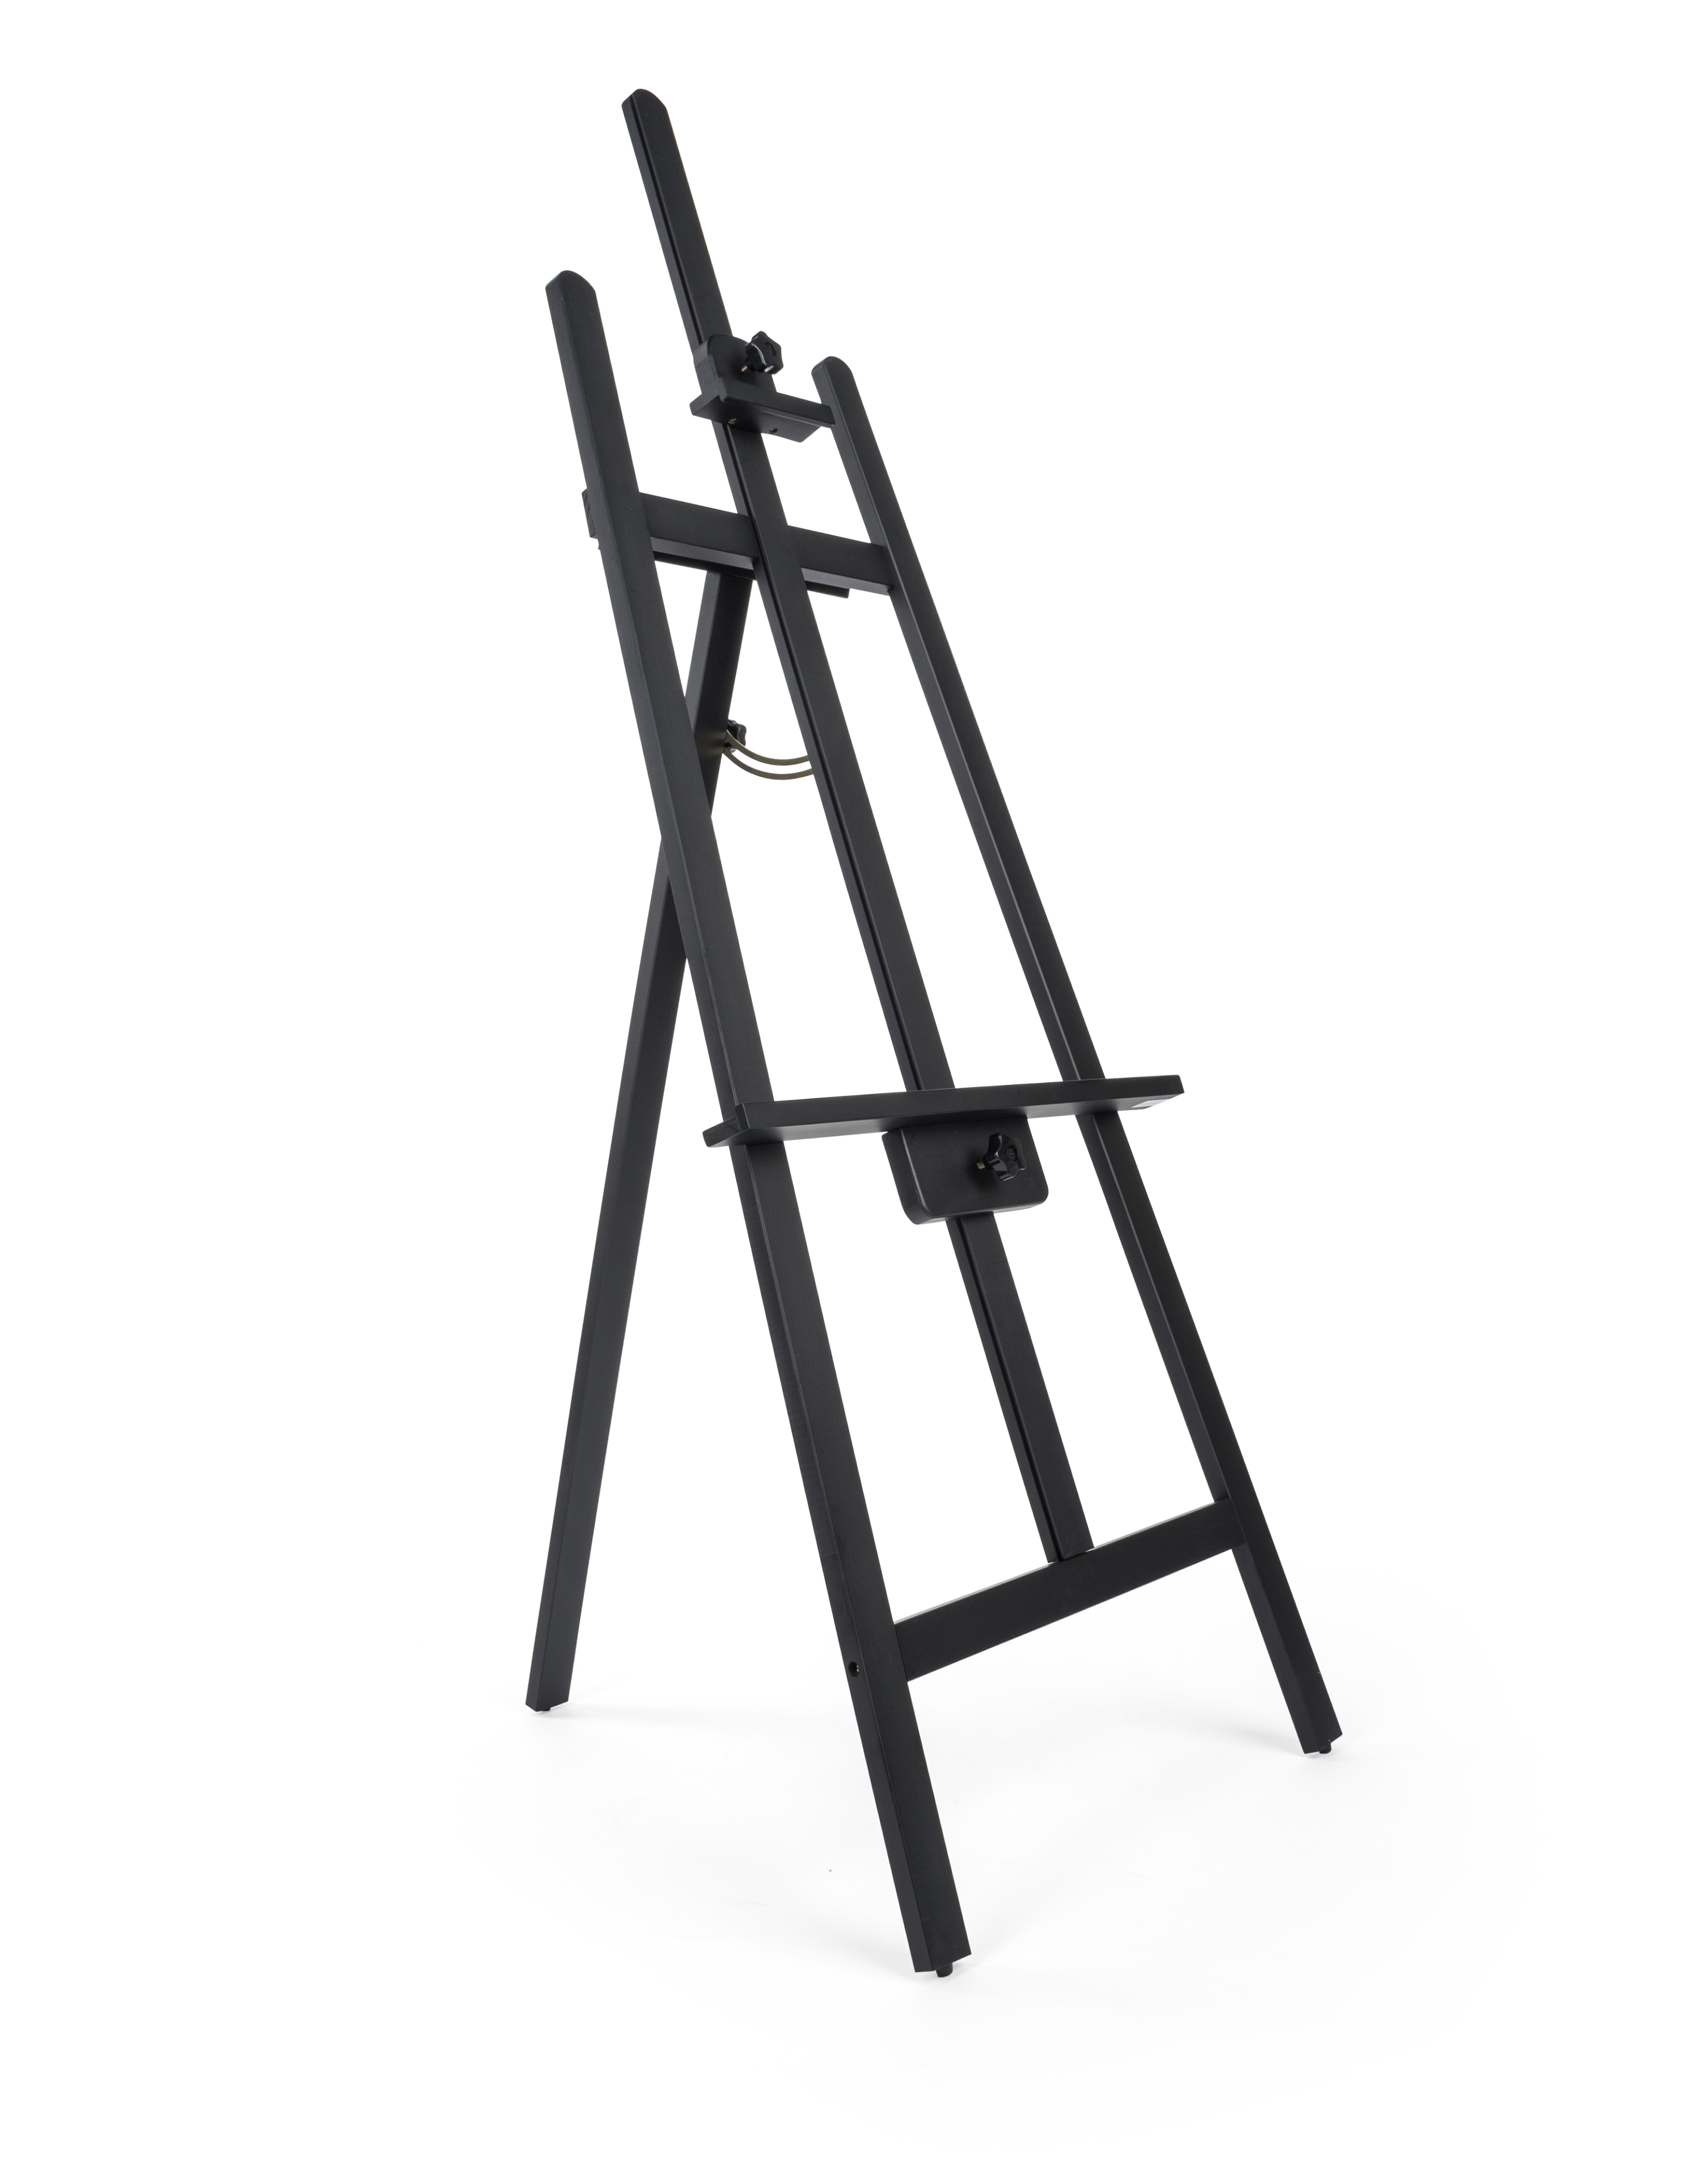 Wood Easel for Floor with Adjustable Top Clamp and Bottom Support Bar -  Black